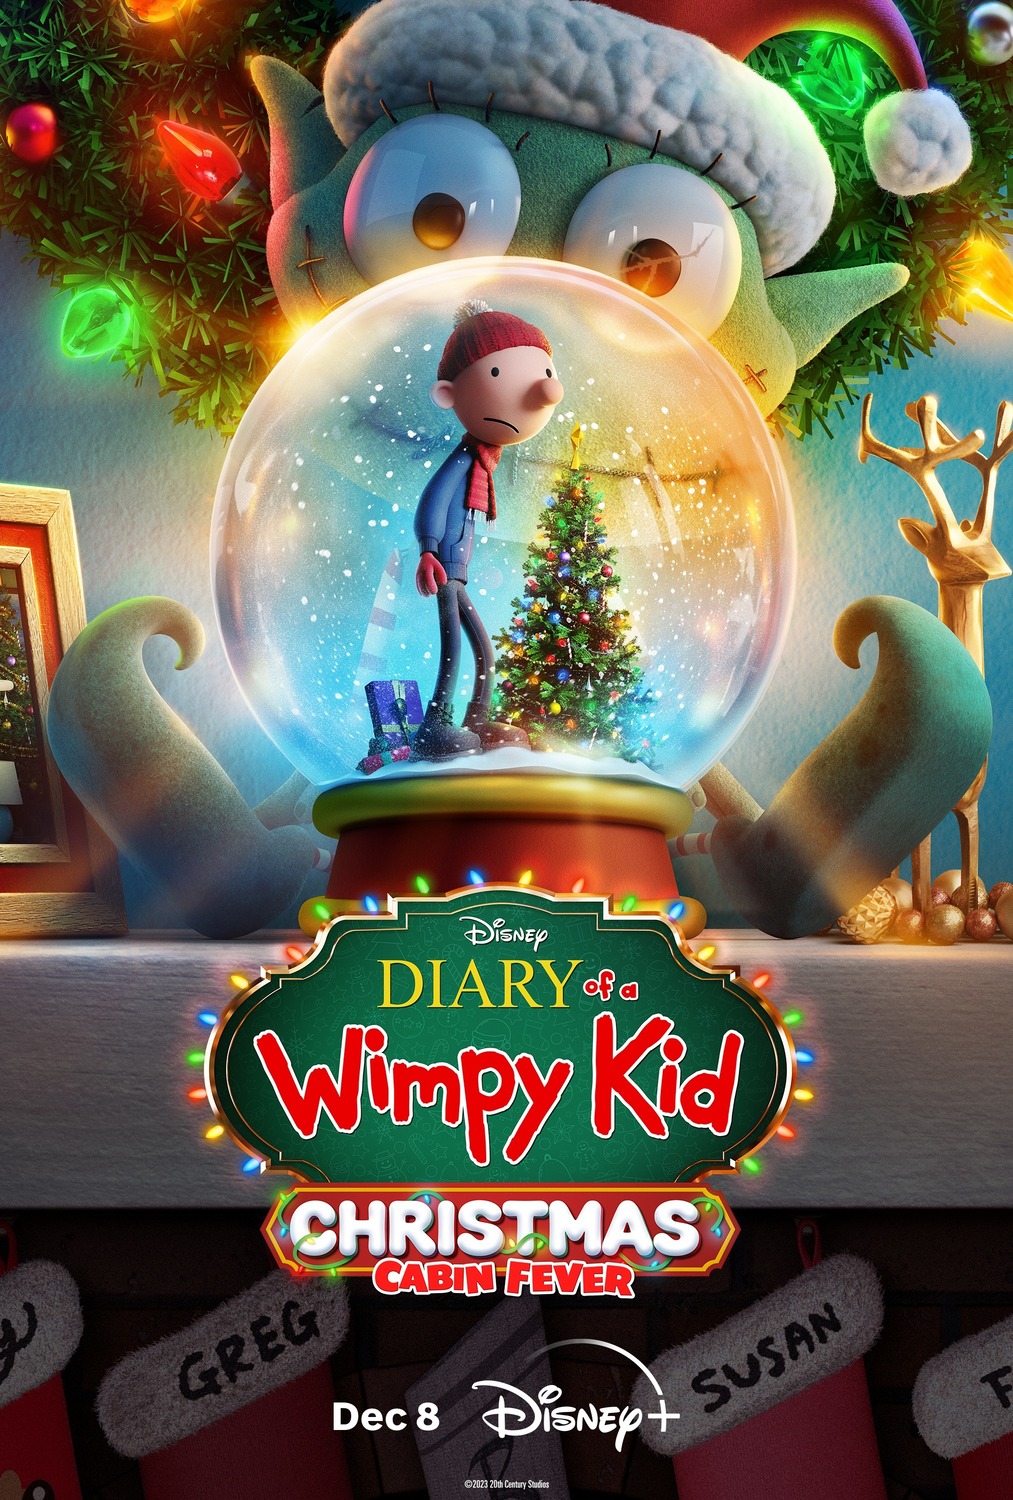 Extra Large Movie Poster Image for Diary of a Wimpy Kid Christmas: Cabin Fever (#3 of 4)